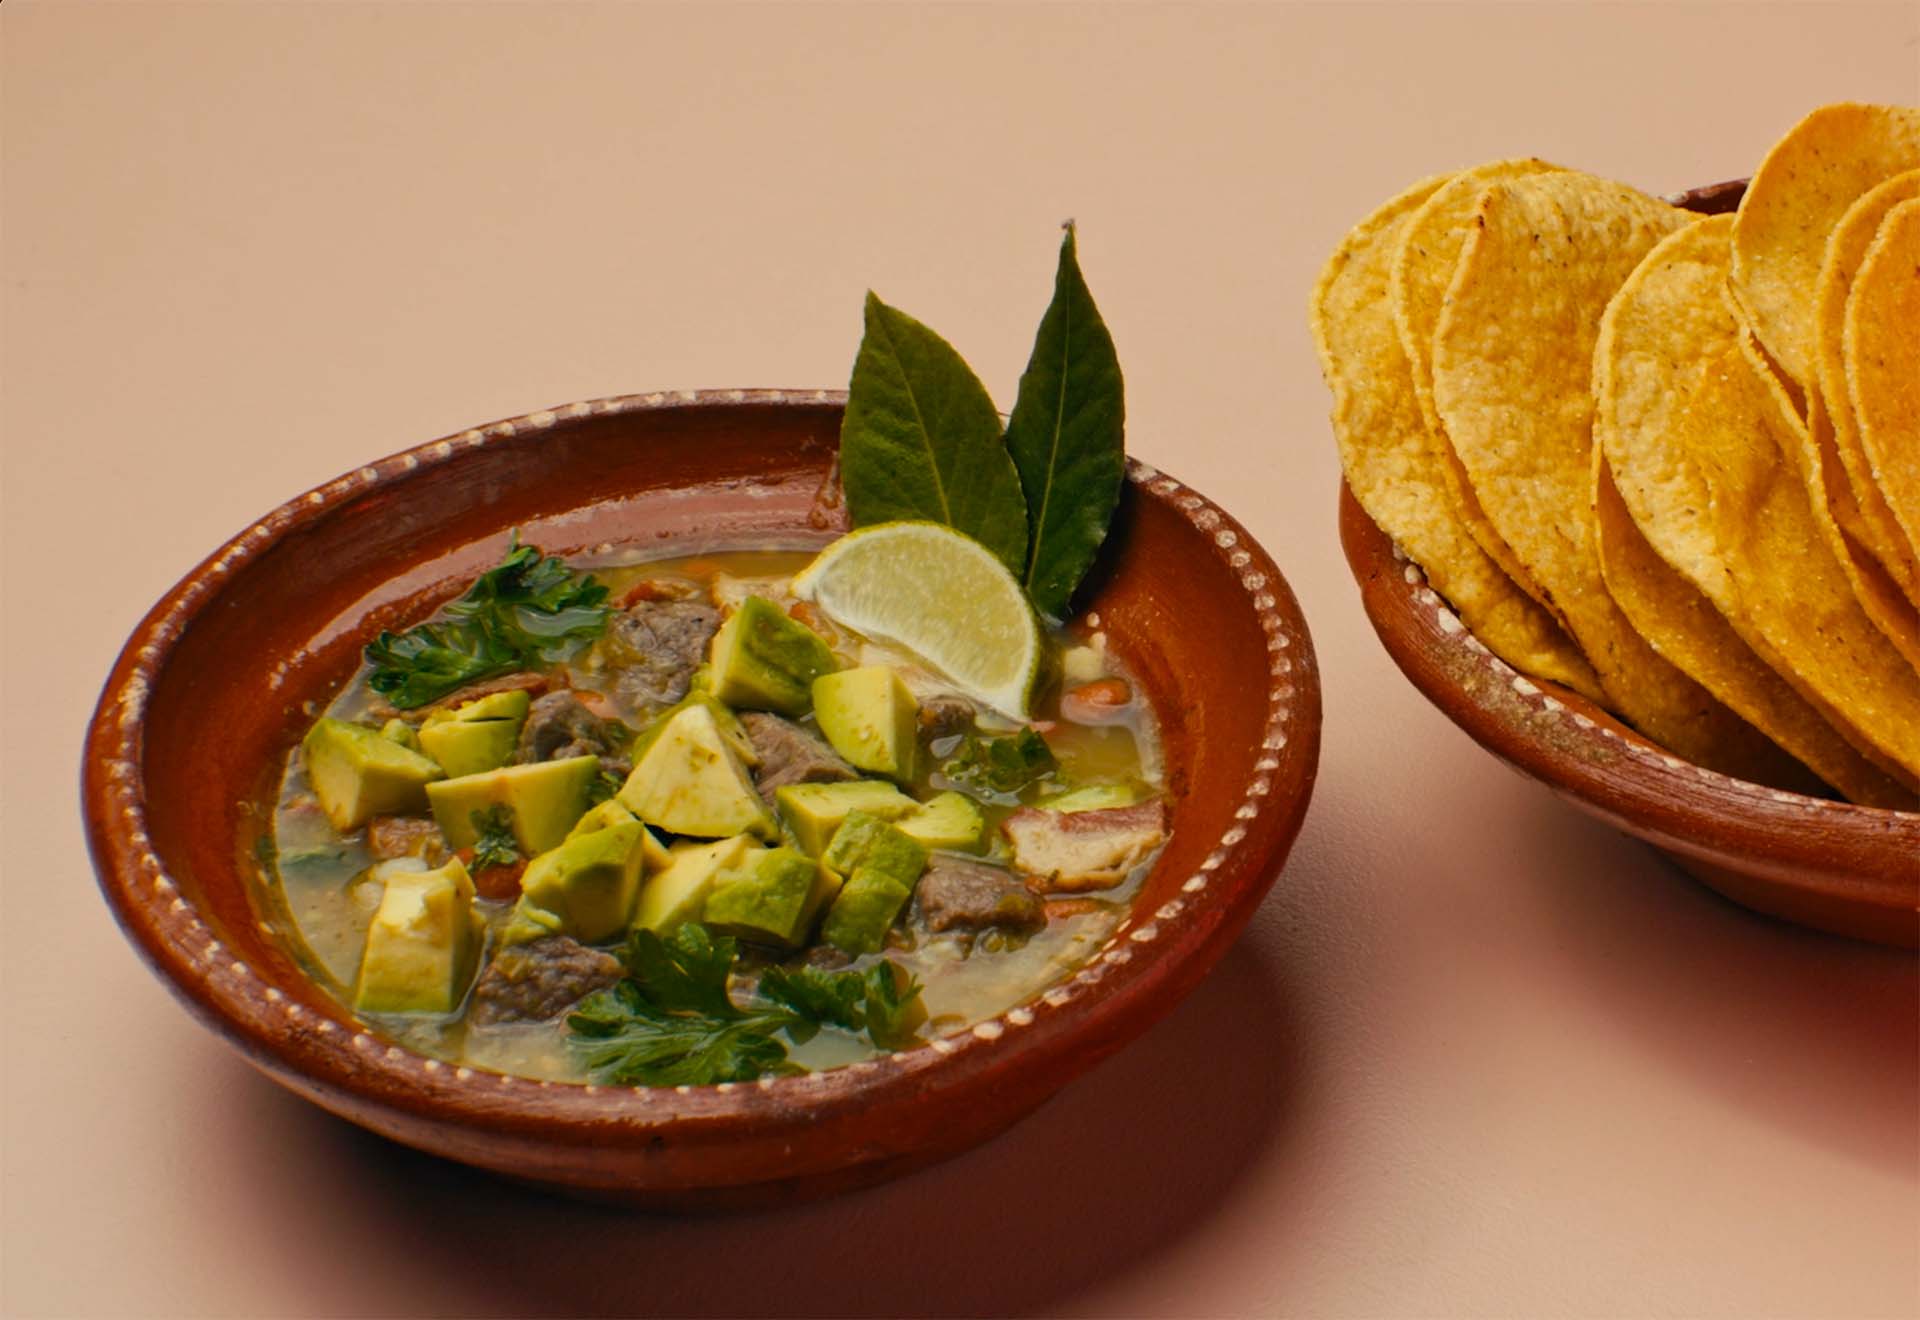 A stew made with bacon, onion, beans and avocado, served with a bowl of tostadas on the side.